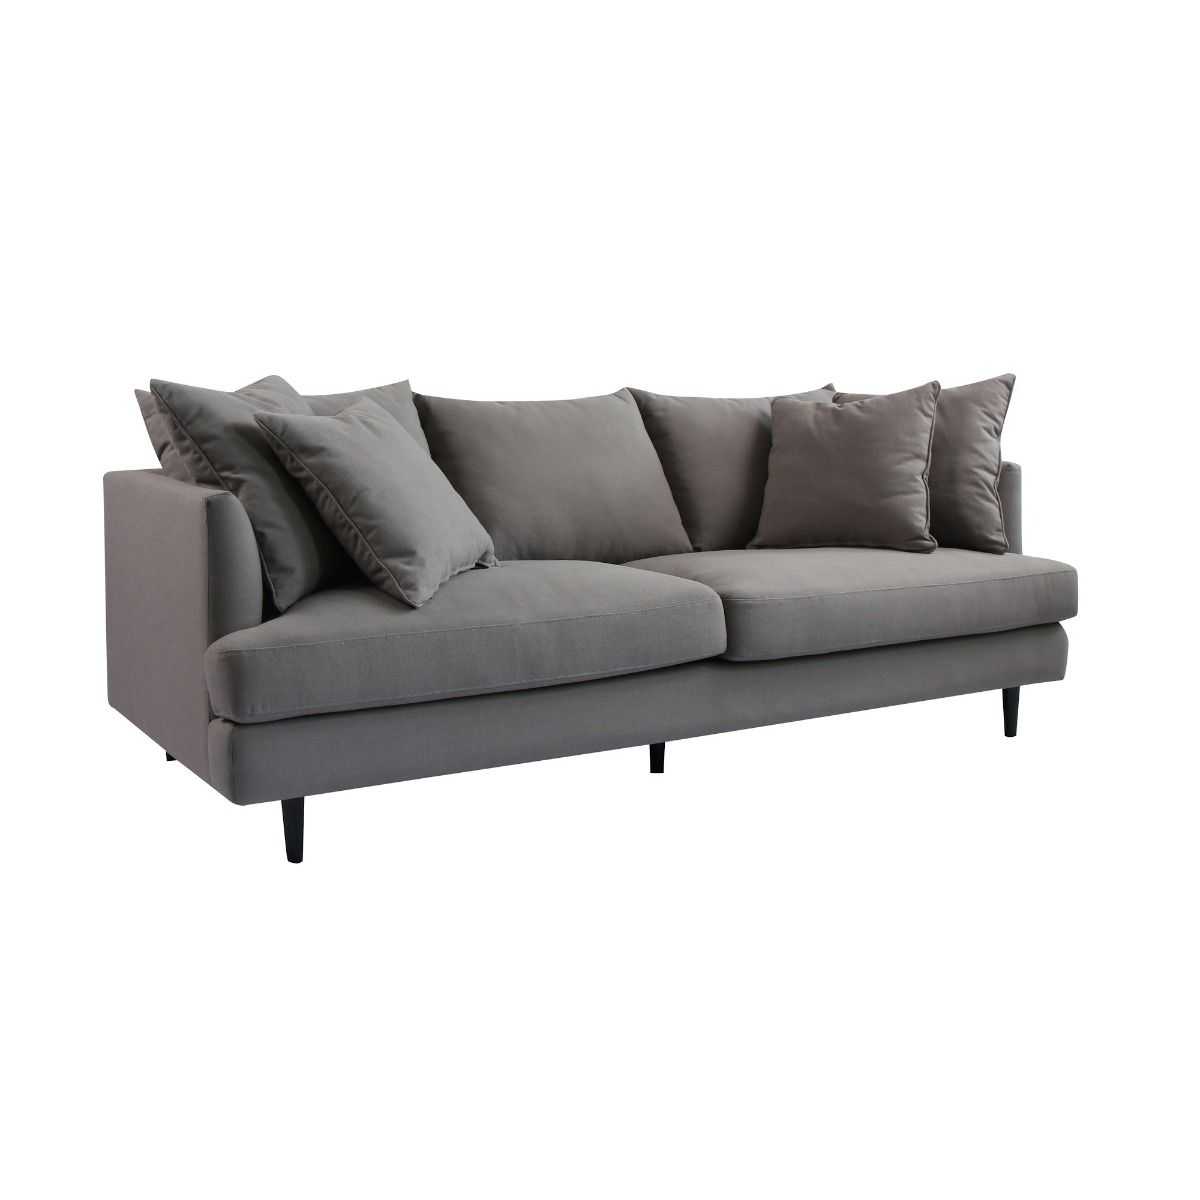 CR Conway 3 Seater Fabric Sofa